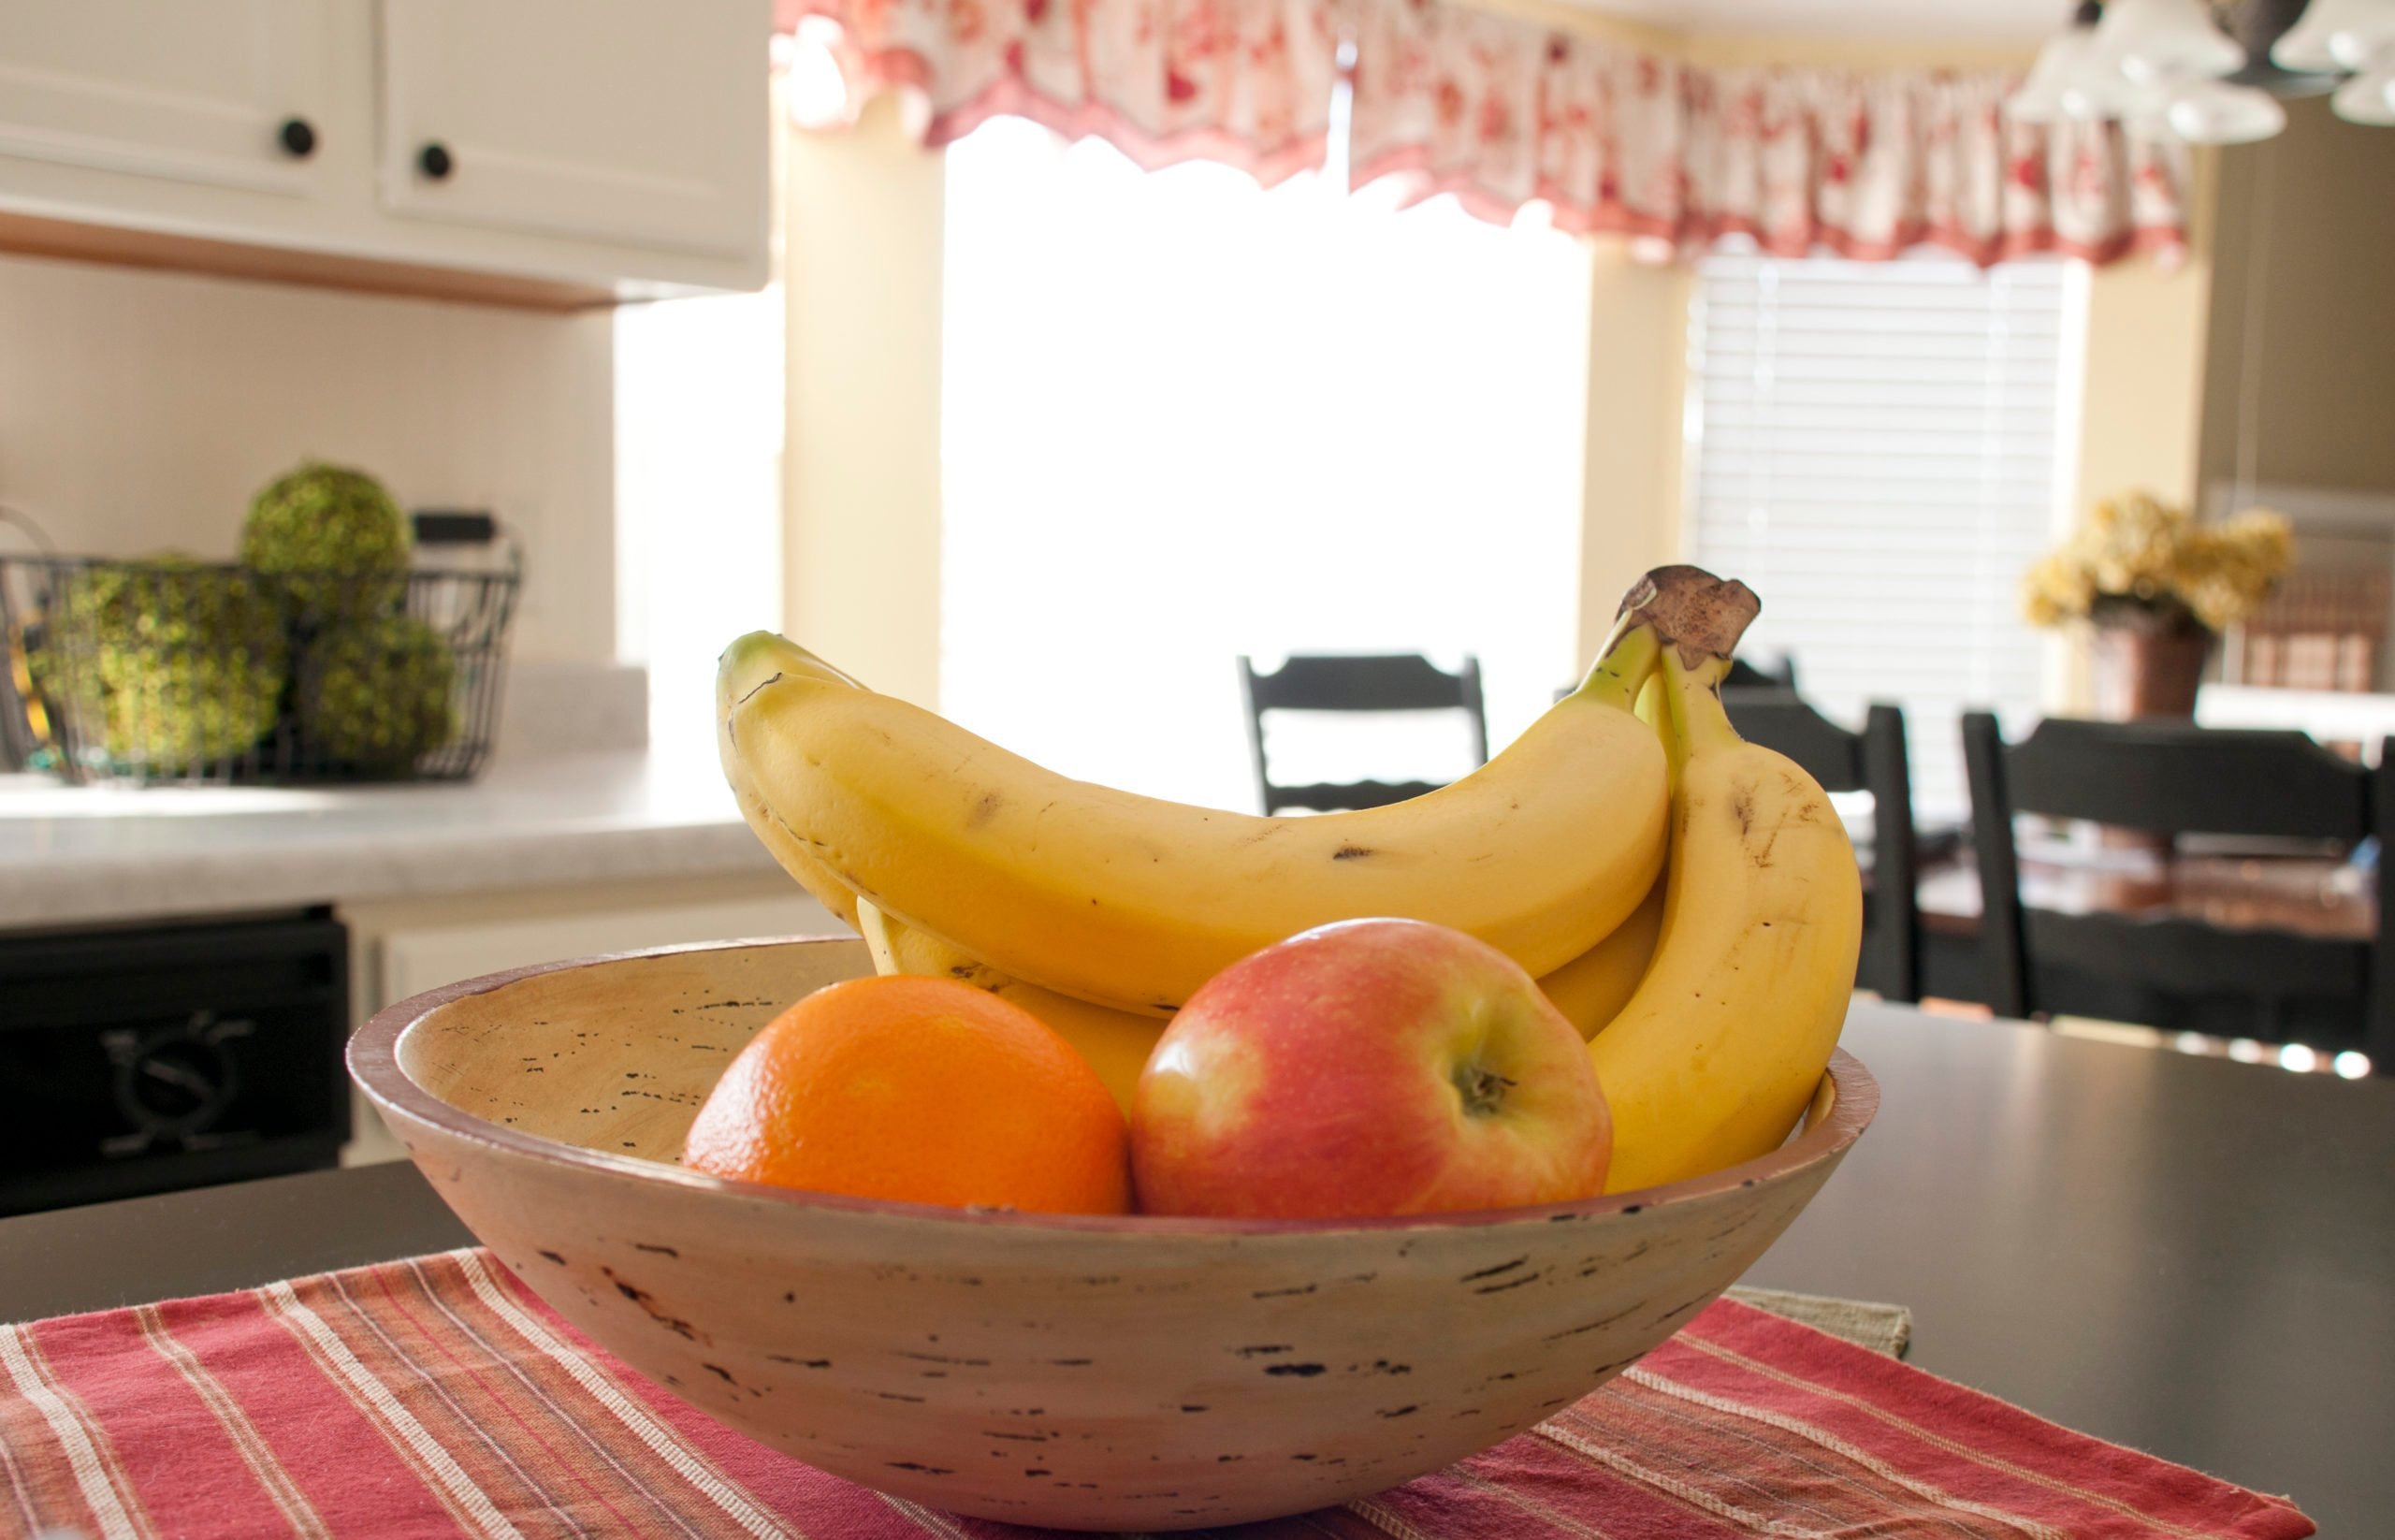 Fruit bowl in the kitchen